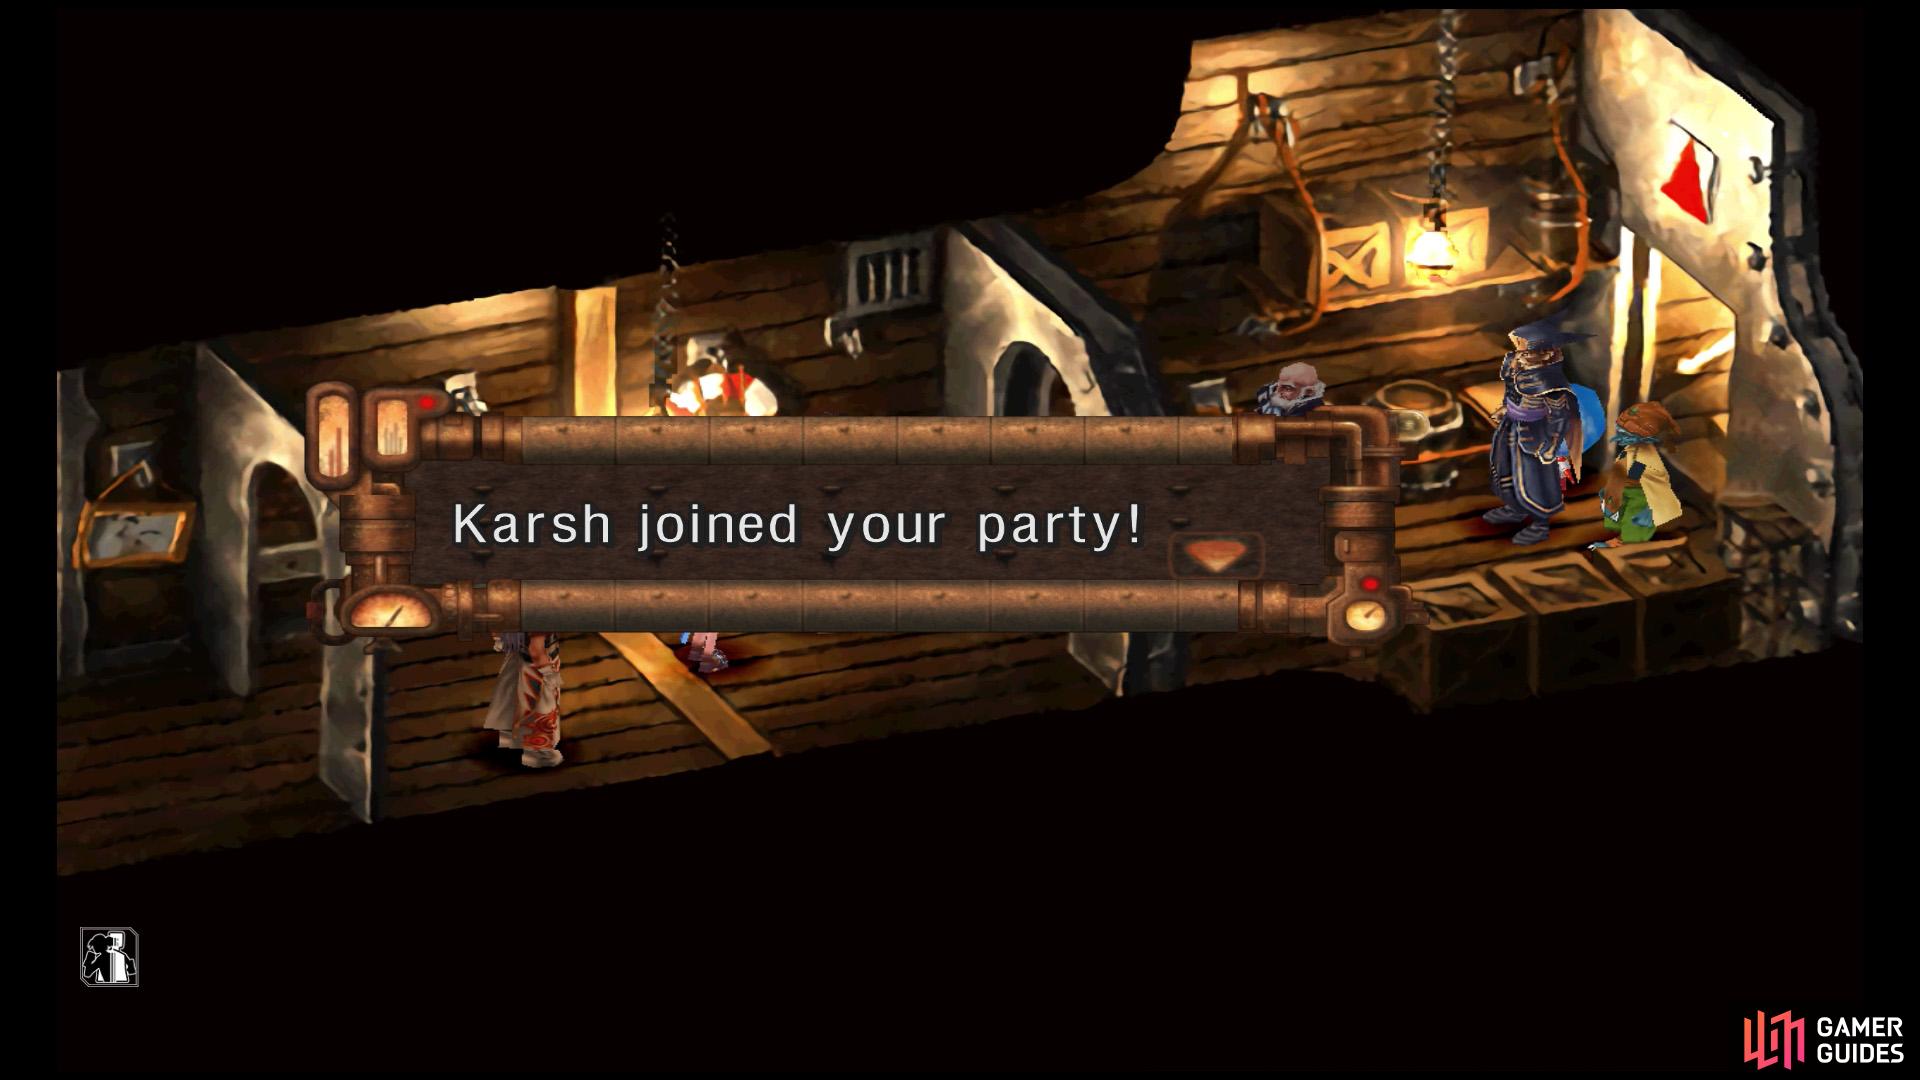 You'll need Karsh for a sidequest soon.